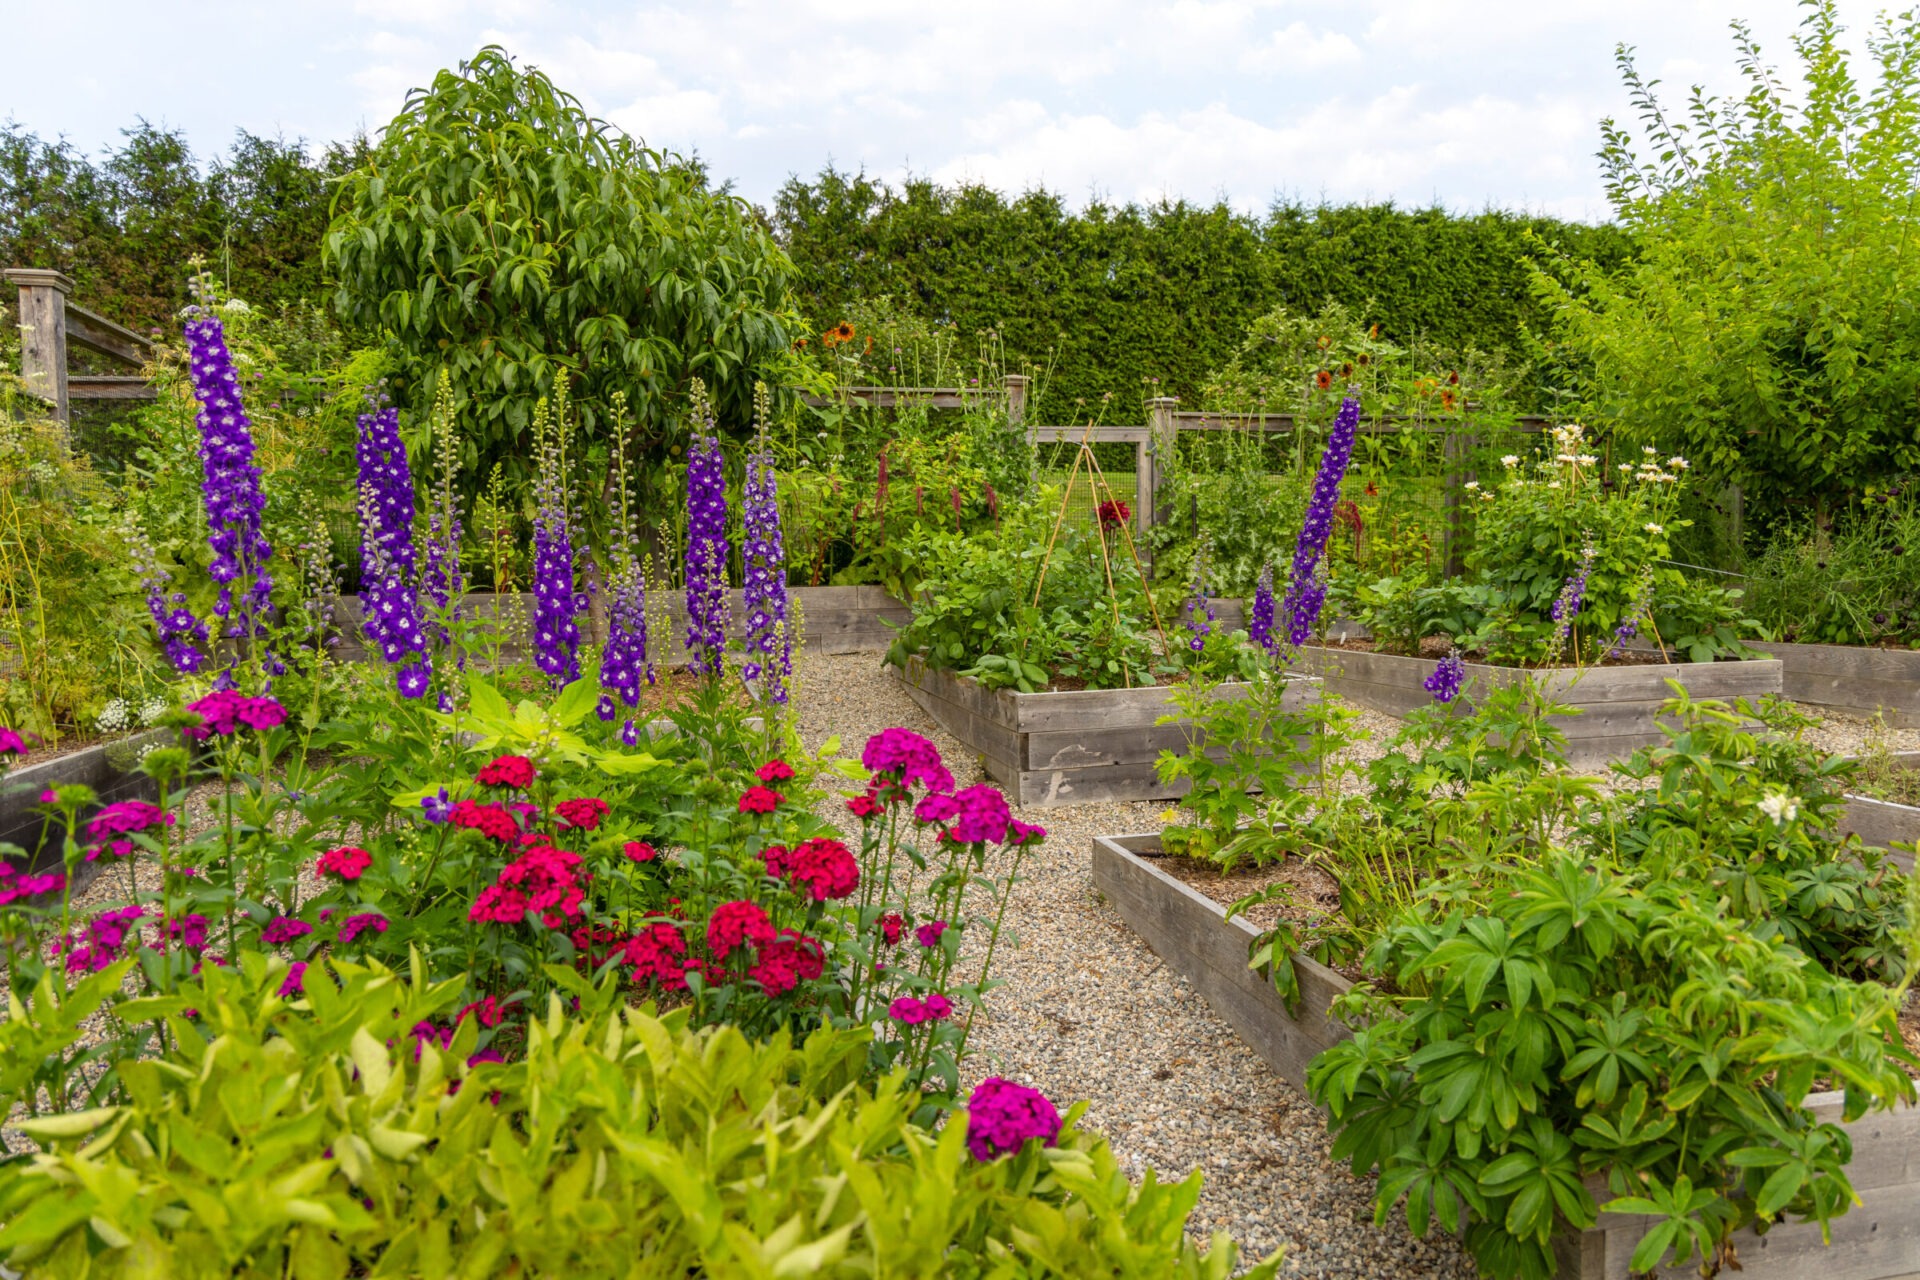 The image shows a lush garden with raised beds, vibrant purple and red flowers, greenery, and a gravel path under a partially cloudy sky.